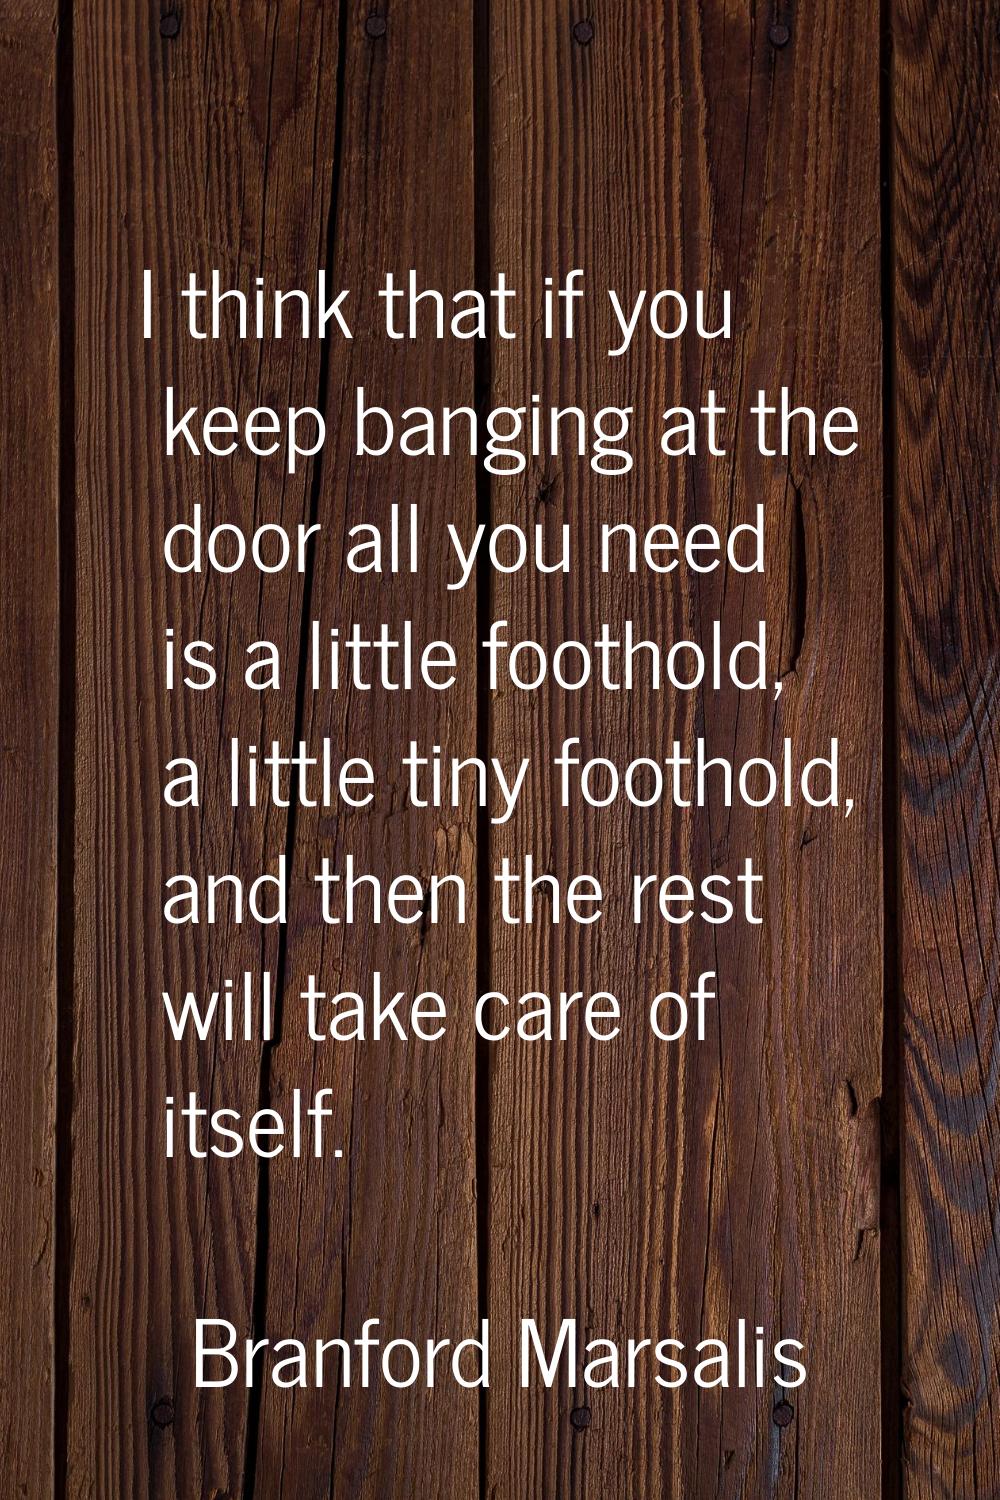 I think that if you keep banging at the door all you need is a little foothold, a little tiny footh